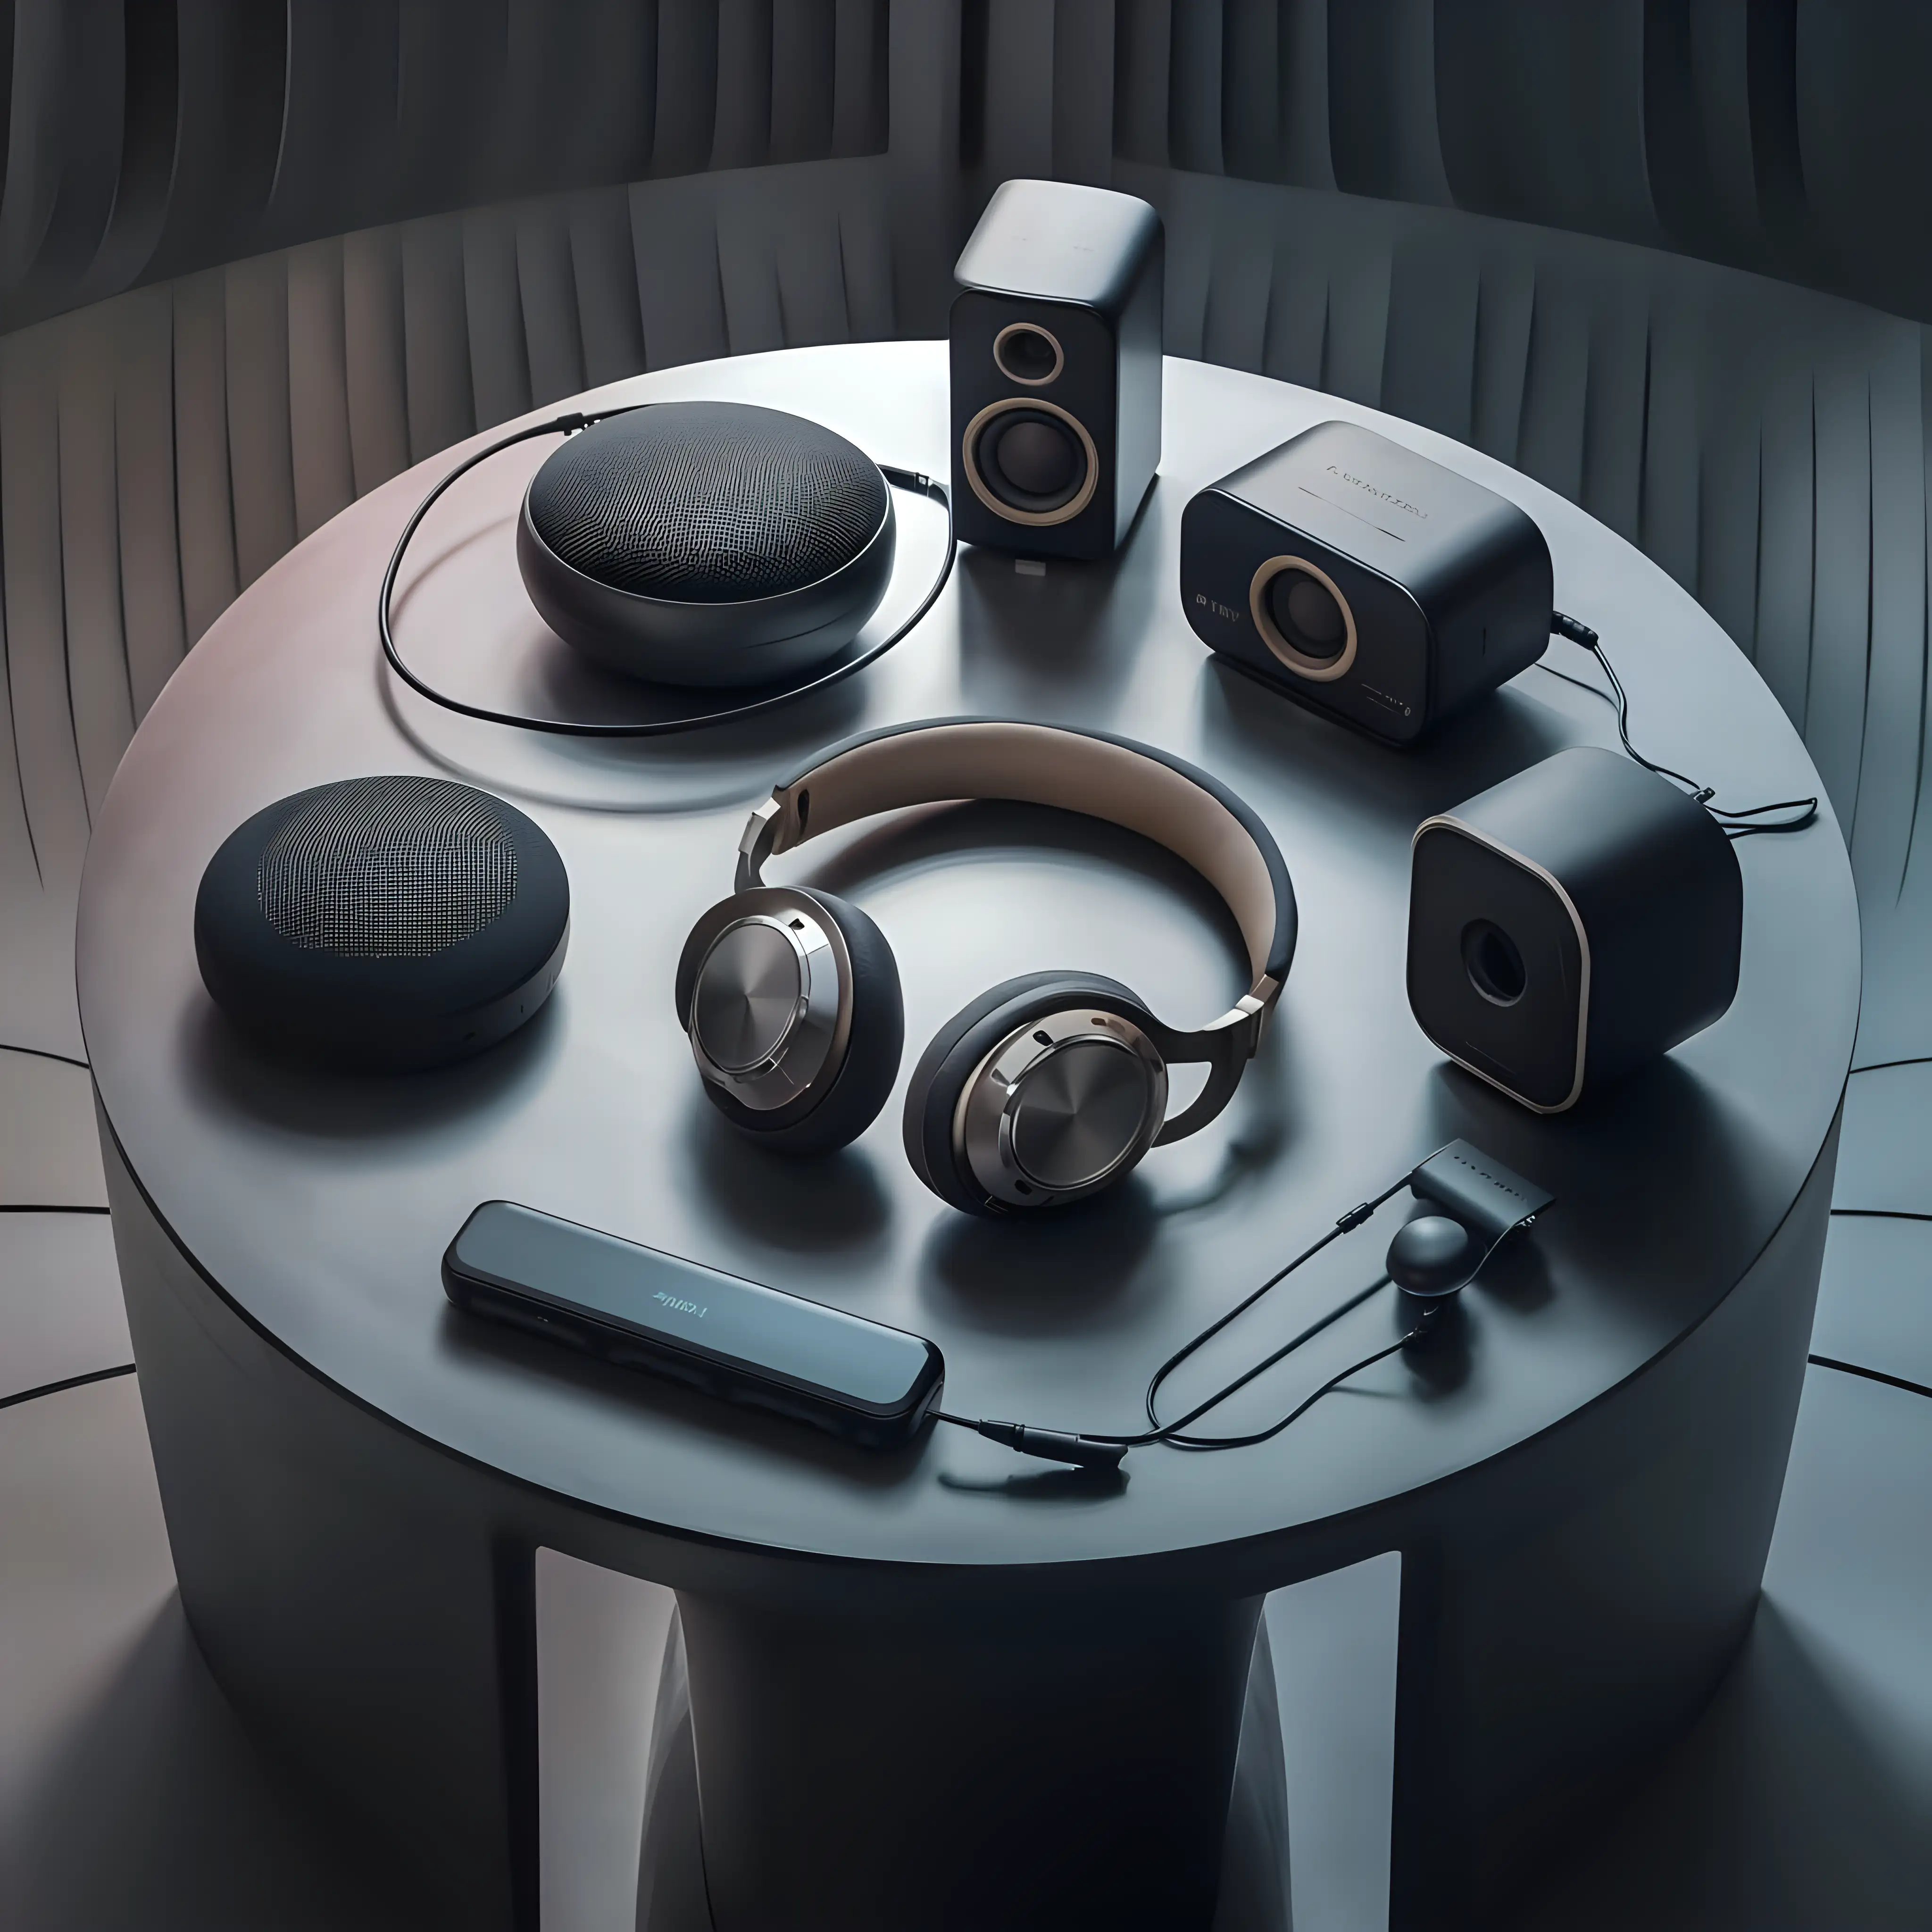 Latest Speakers and Headphone Devices Showcase